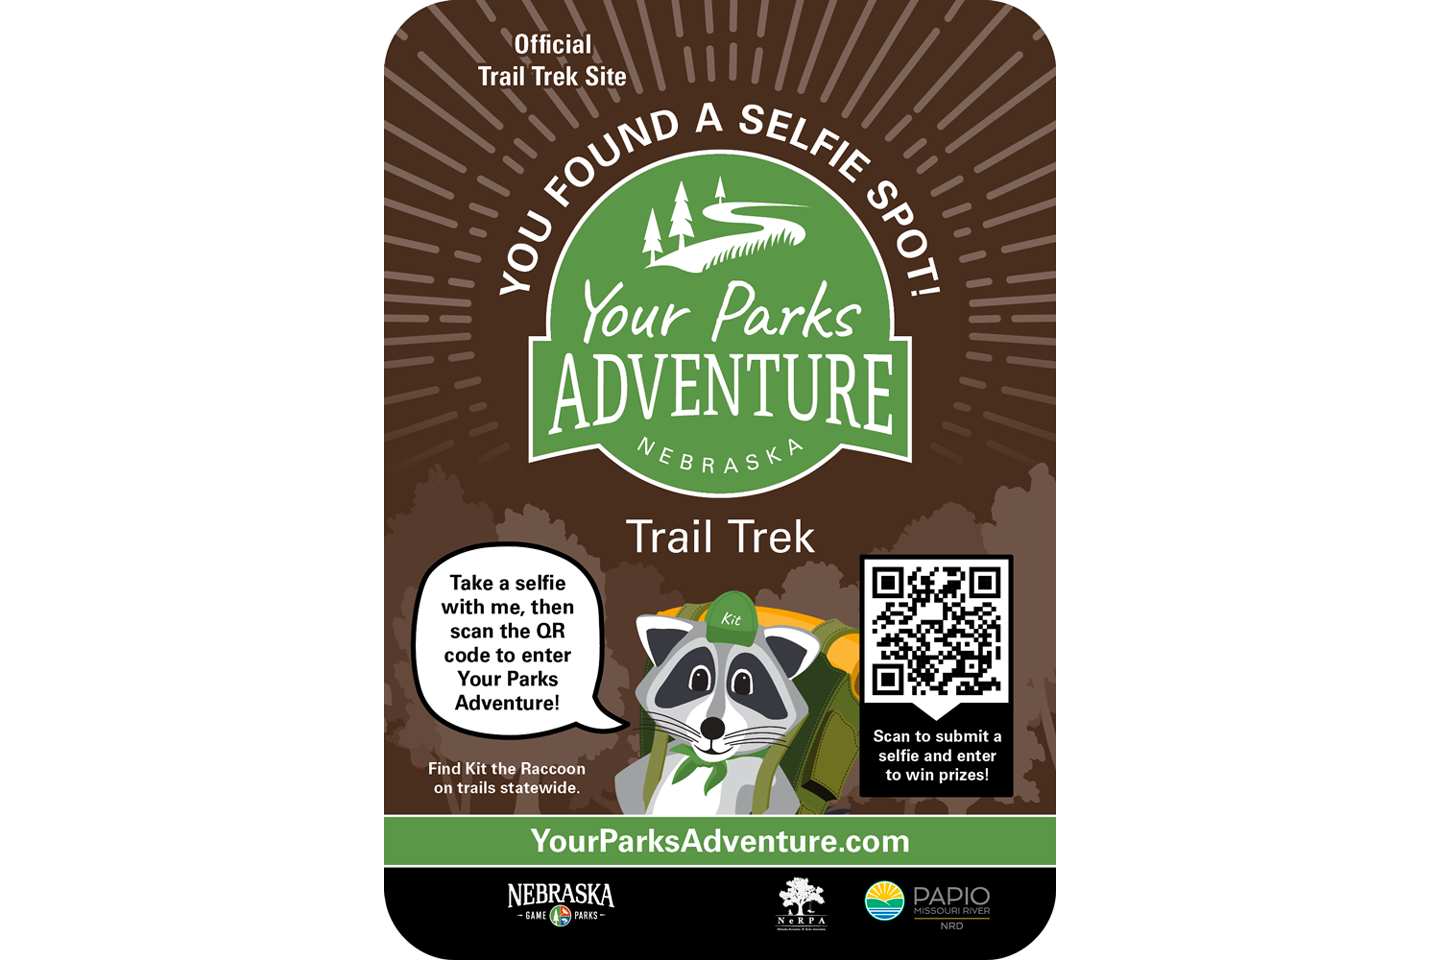 Read More: Hit the trails for prizes in new adventure challenge